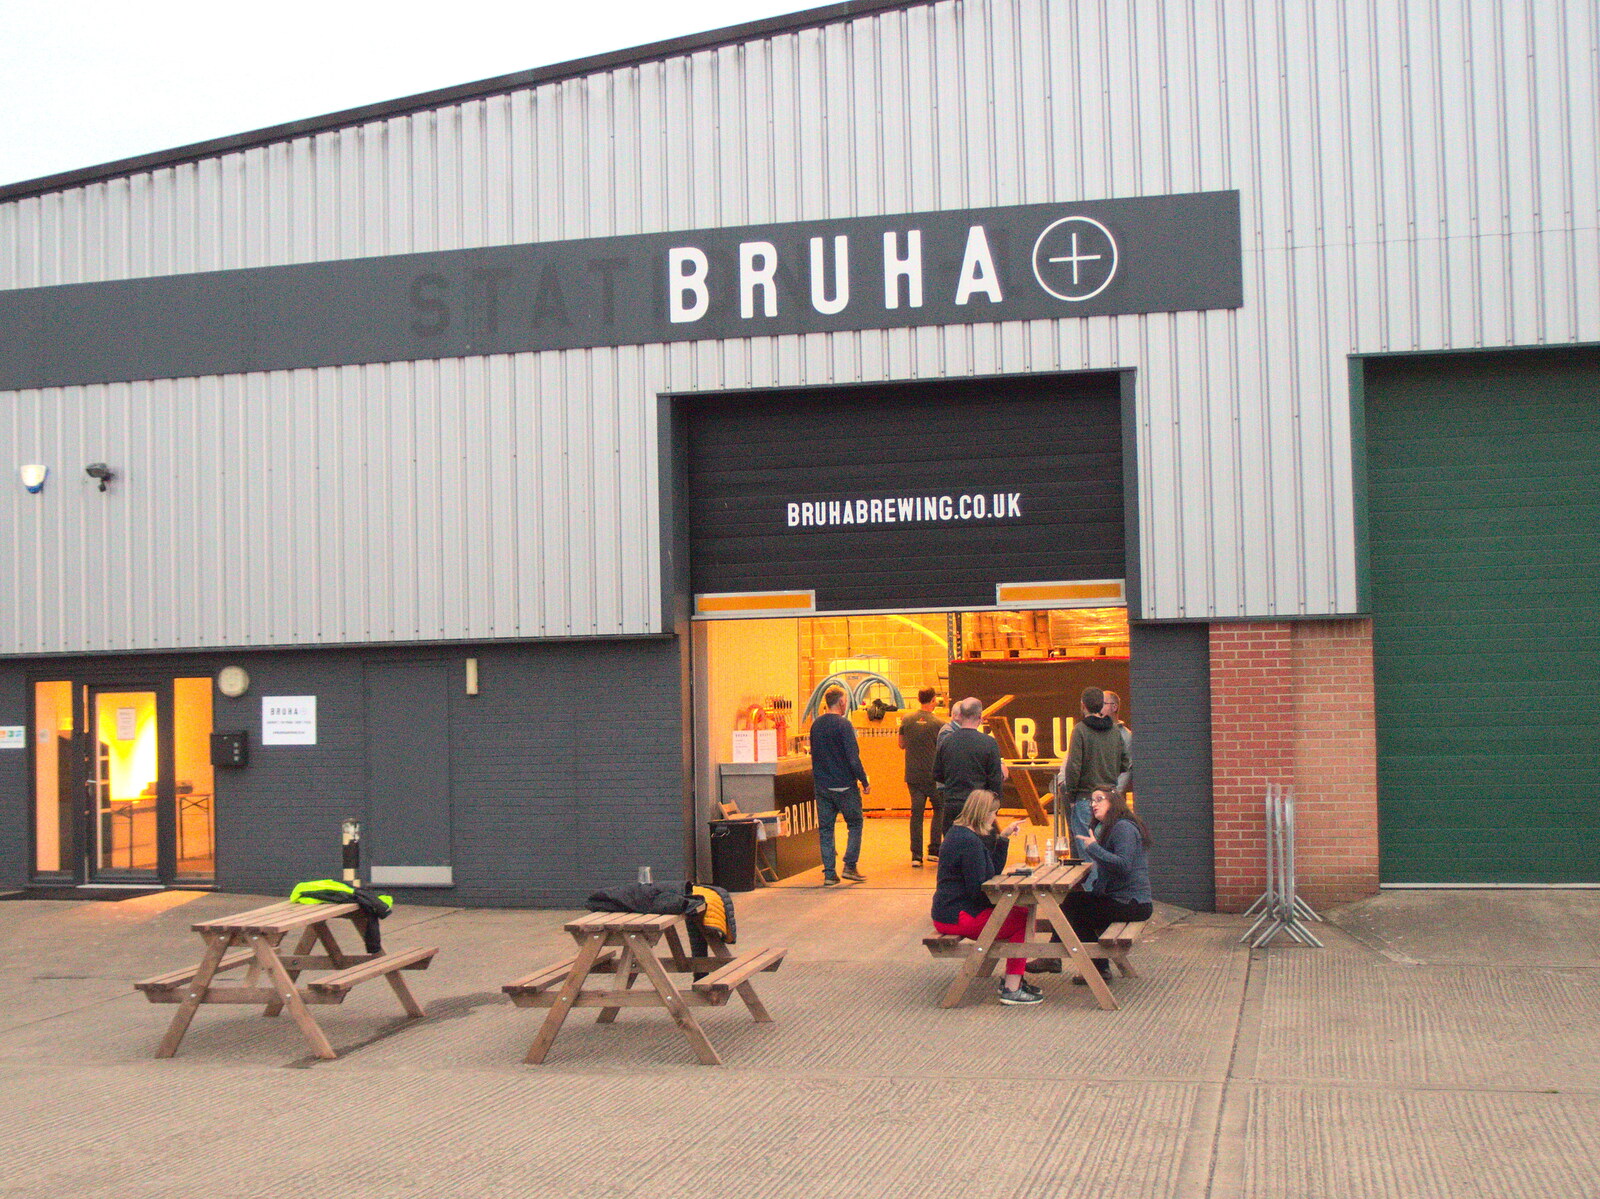 Bruha's sign shows its Station 119 legacy from Garden Centres, and Hamish Visits, Brome, Suffolk - 28th May 2021